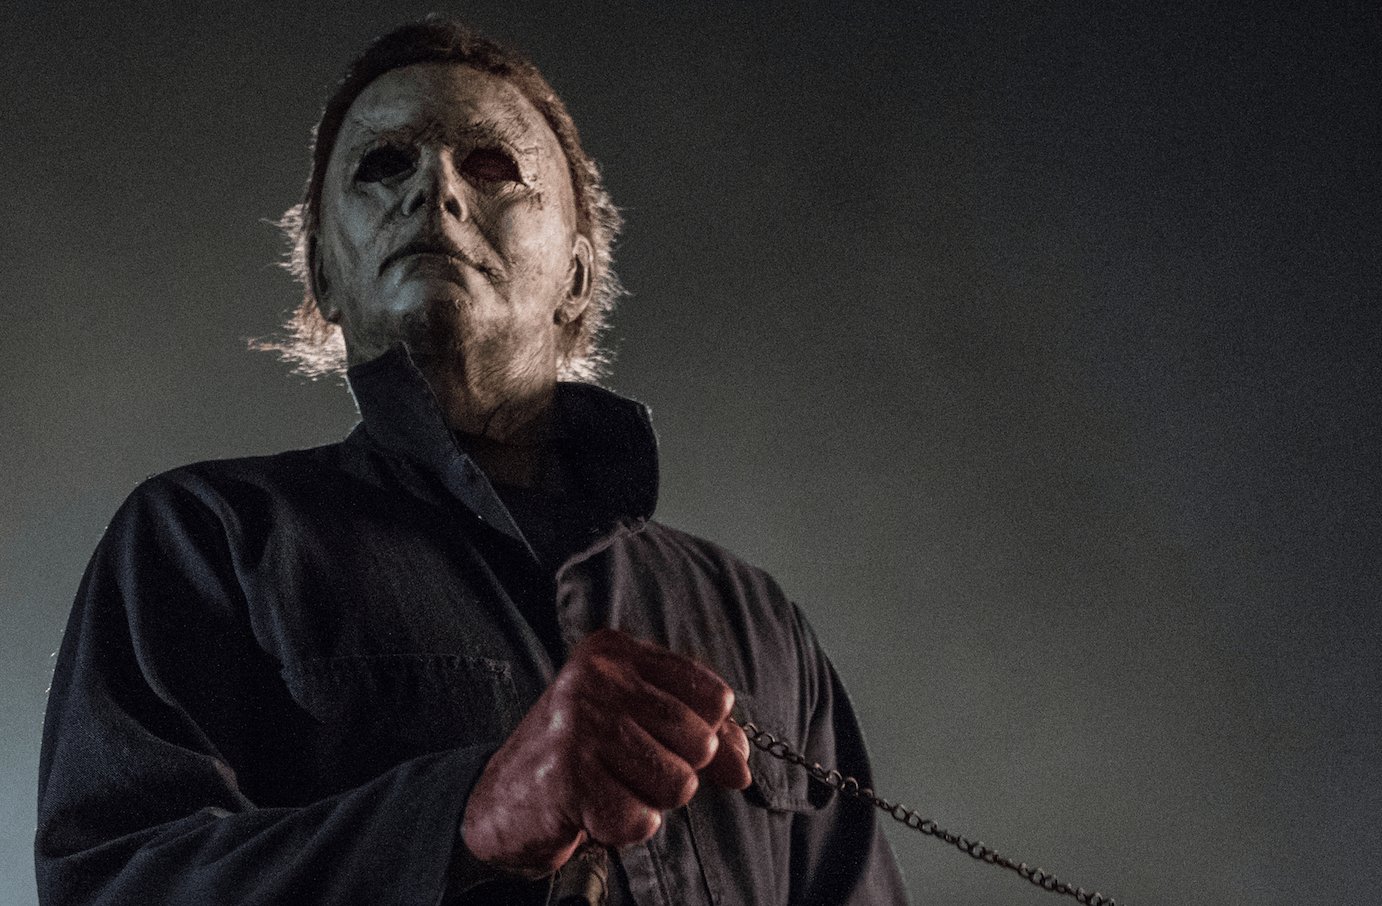 Gallery These Mega Sized HD Image Of Michael Myers